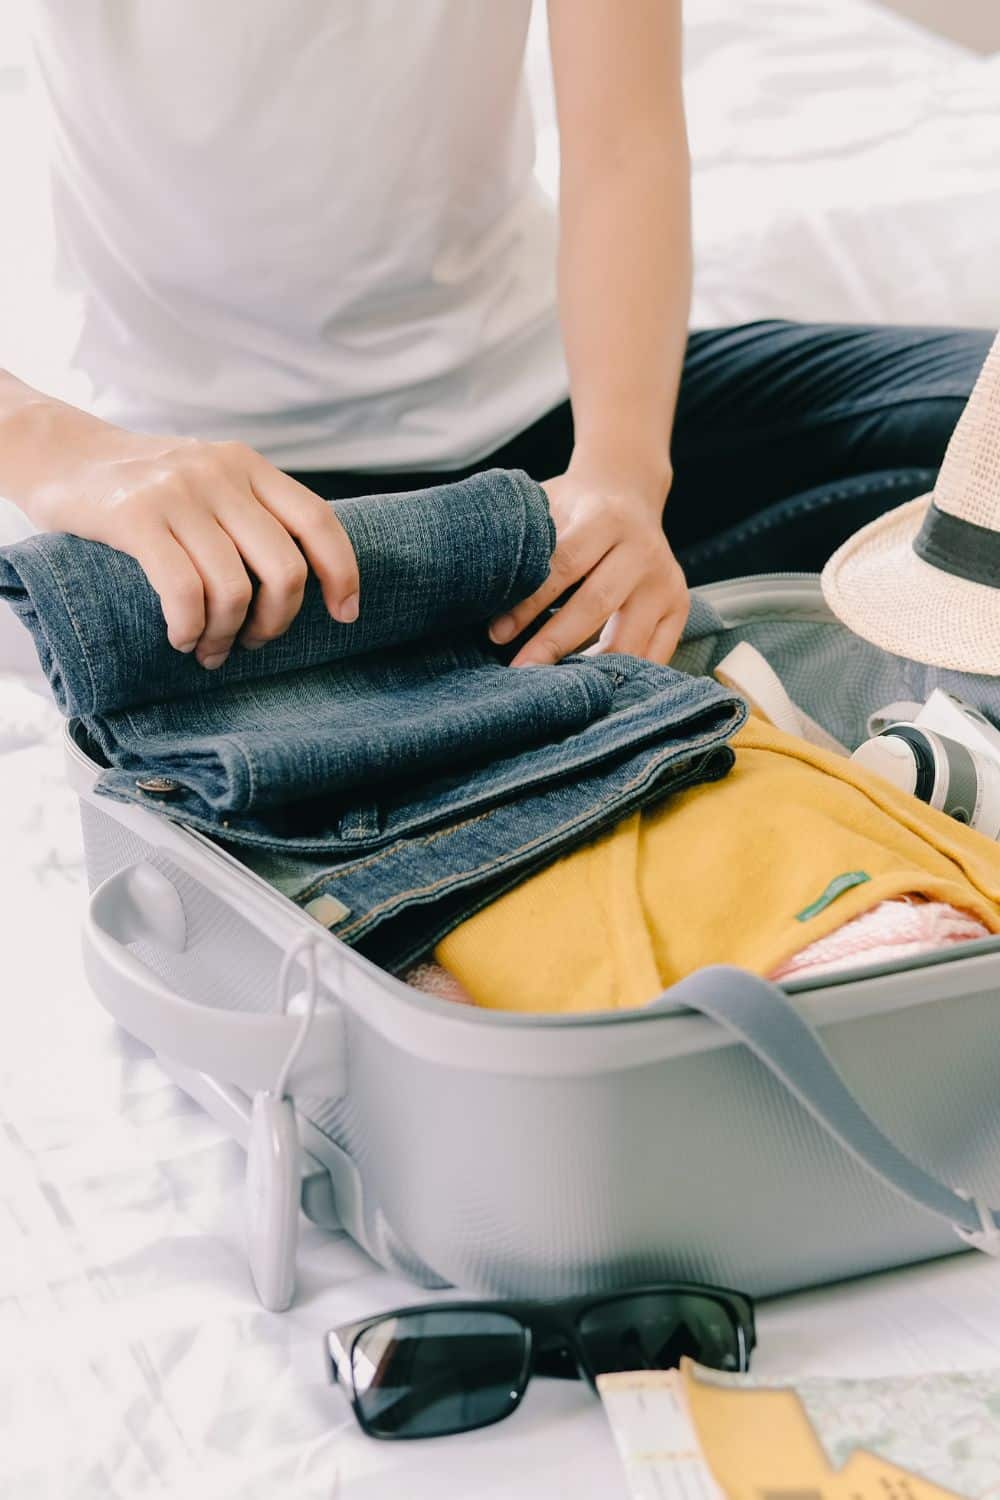 6 Reasons You Should Carefully Plan Your Vacation Luggage